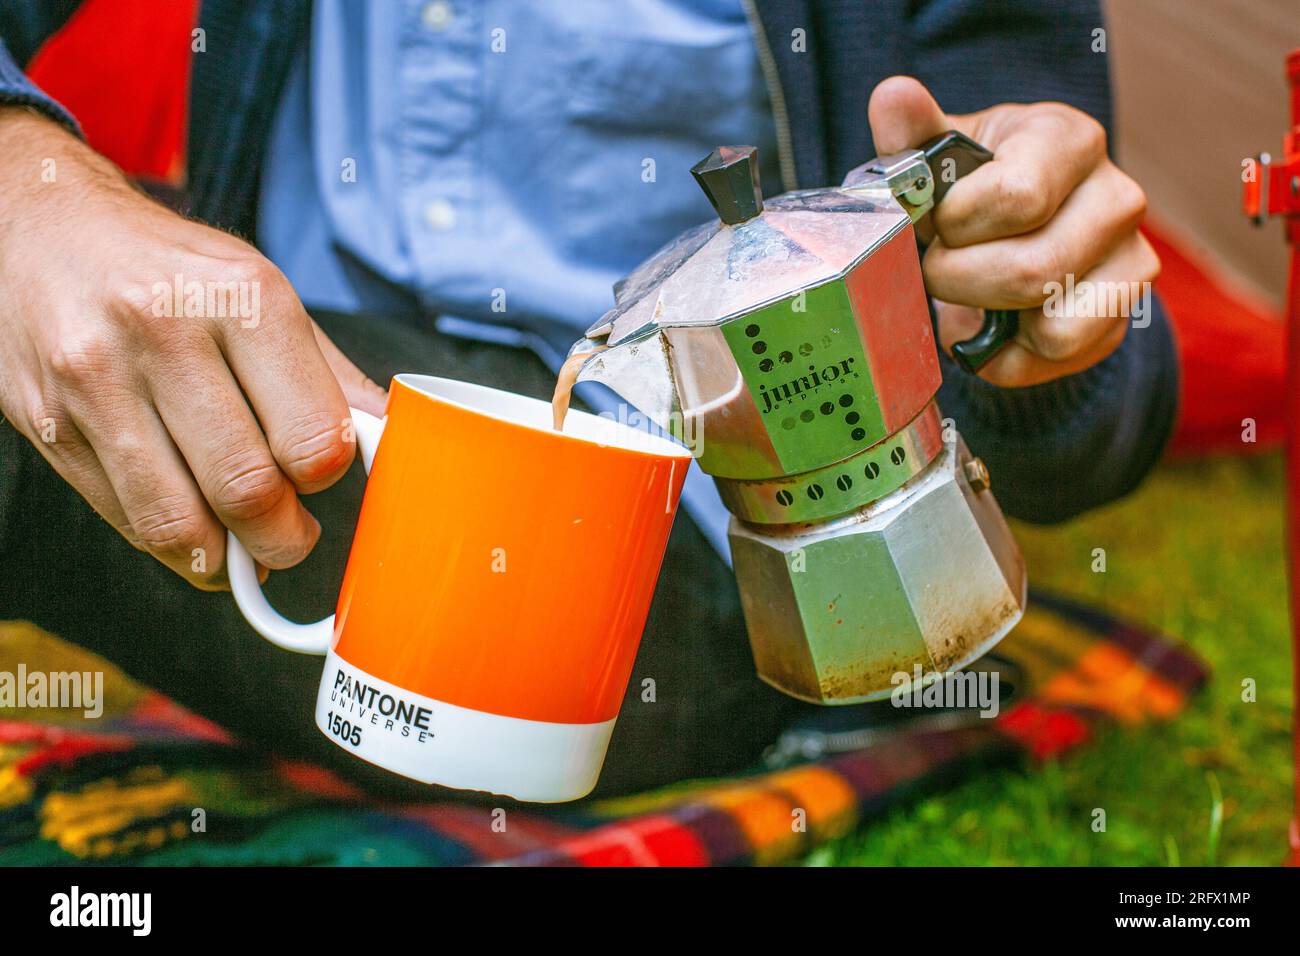 A man pours coffee into a cup from a coffee maker. Stock Photo